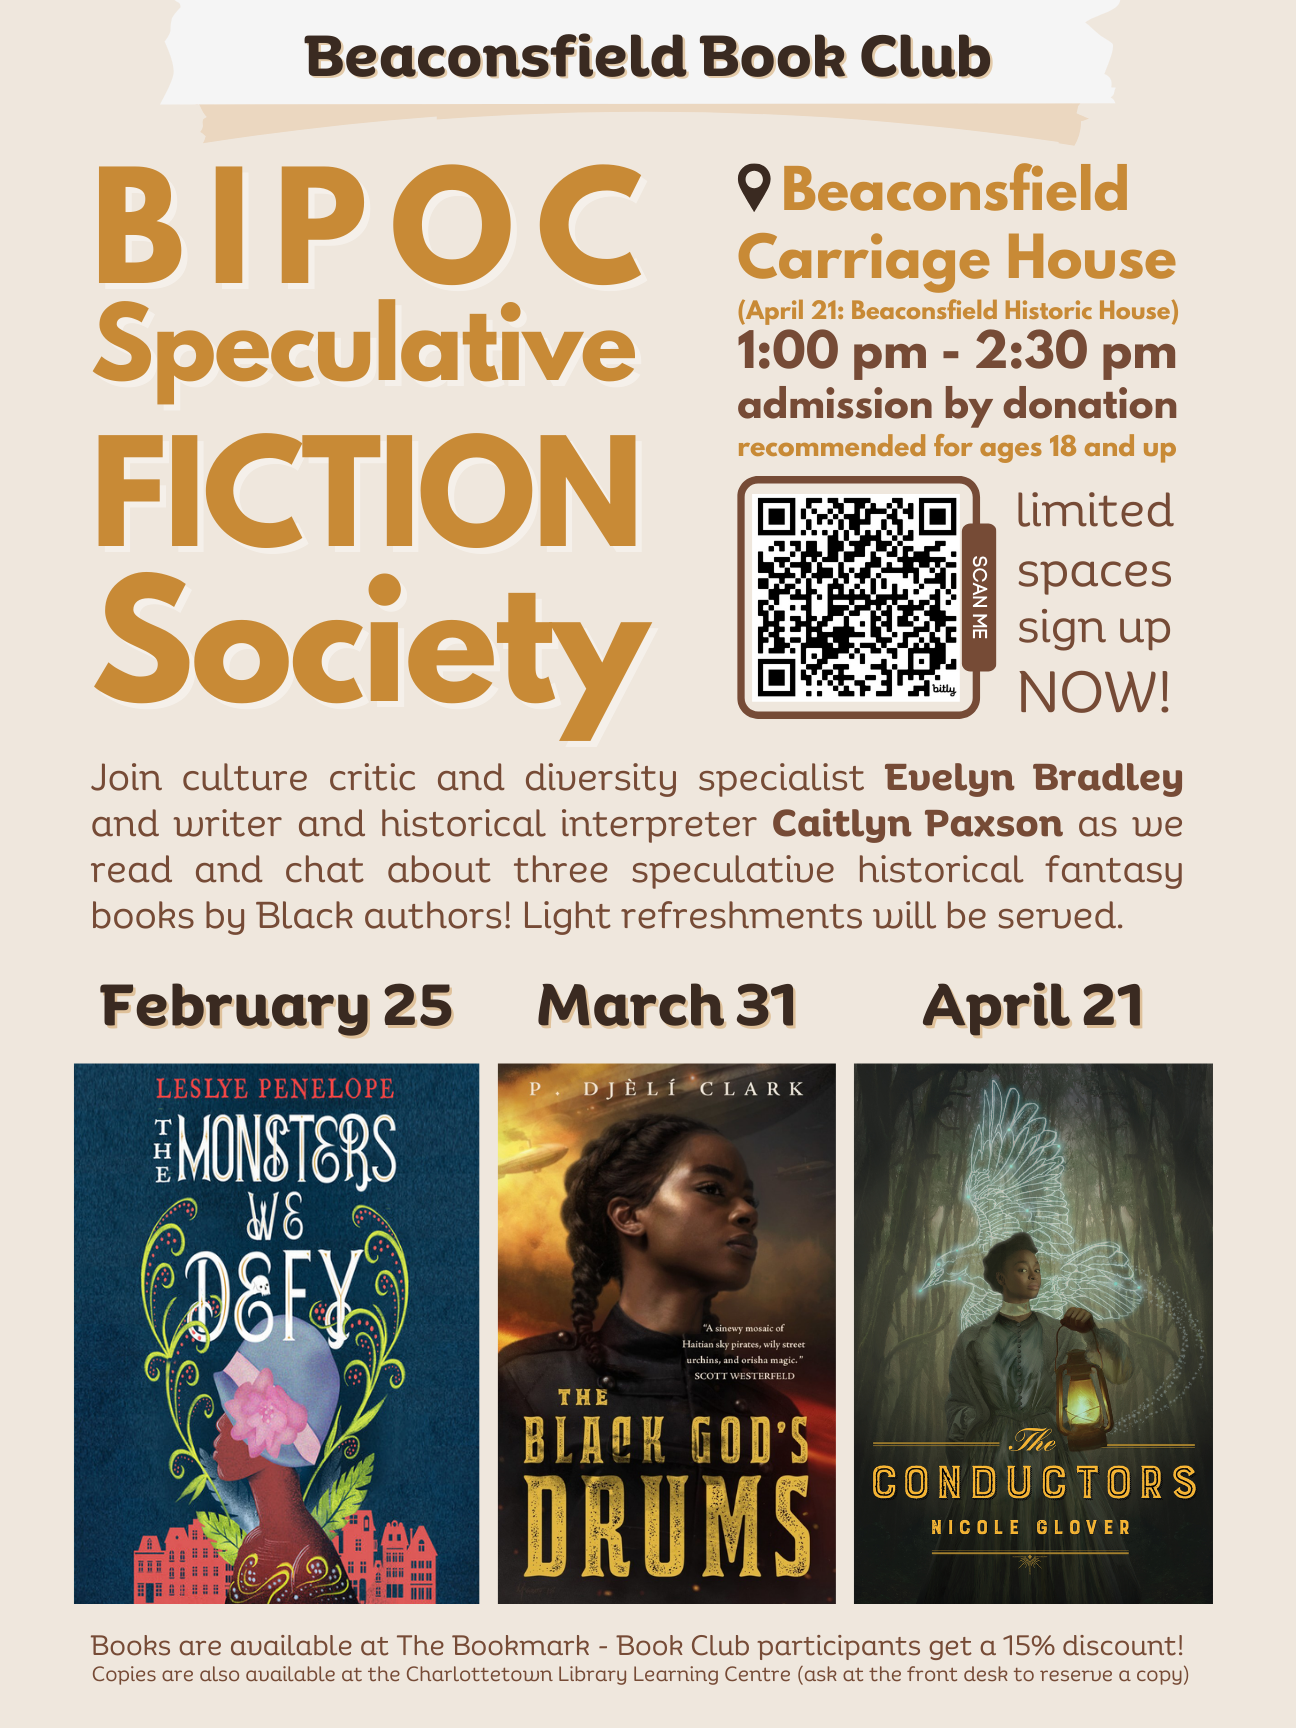 Poster of the Beaconsfield Book Club, featuring 3 books in February, March and April